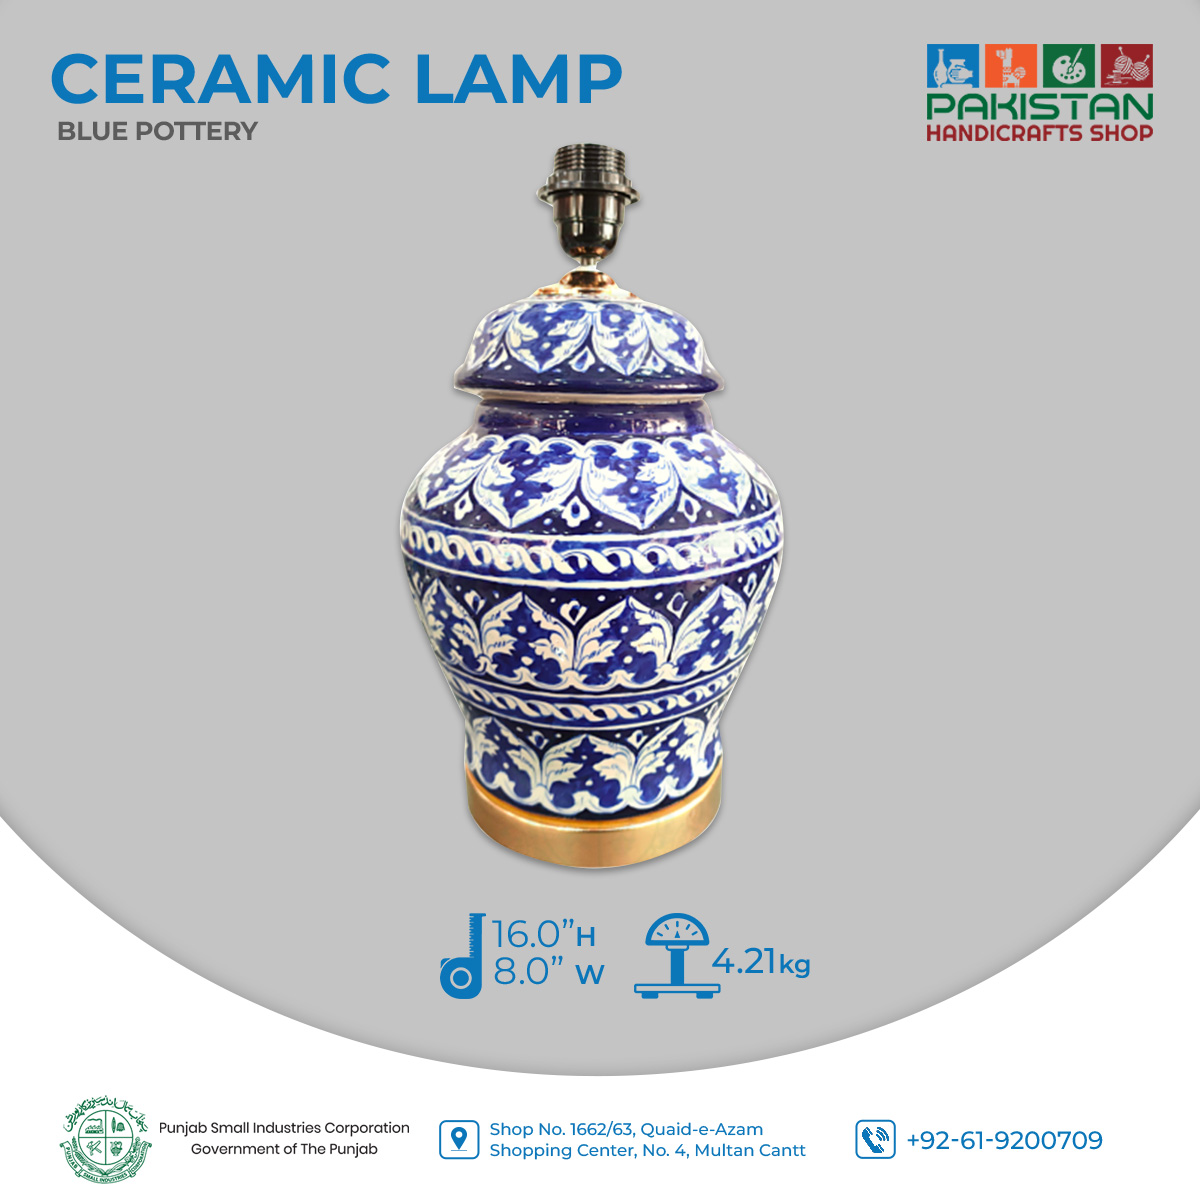 With its stylish aesthetics, the blue pottery lamp is set to be the center of attention in any interior. 

#pakistanhandicrafts #PakistaniArtisans #handmadeinPakistan
#PakistaniCraftsmanship #TraditionalPakistan #CraftsOfPakistan #MadeInPakistan